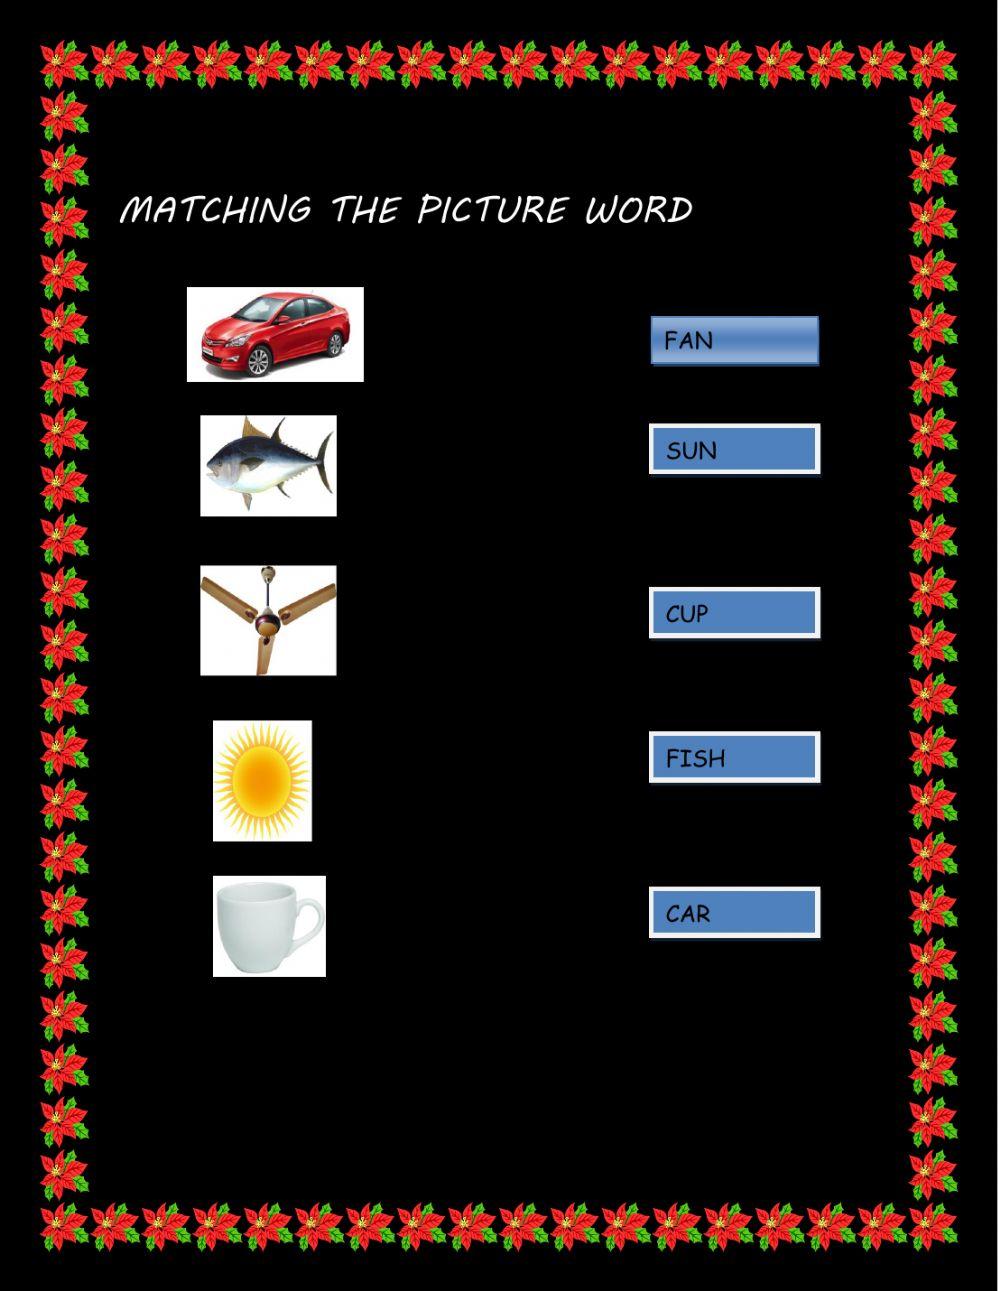 Matching the picture word